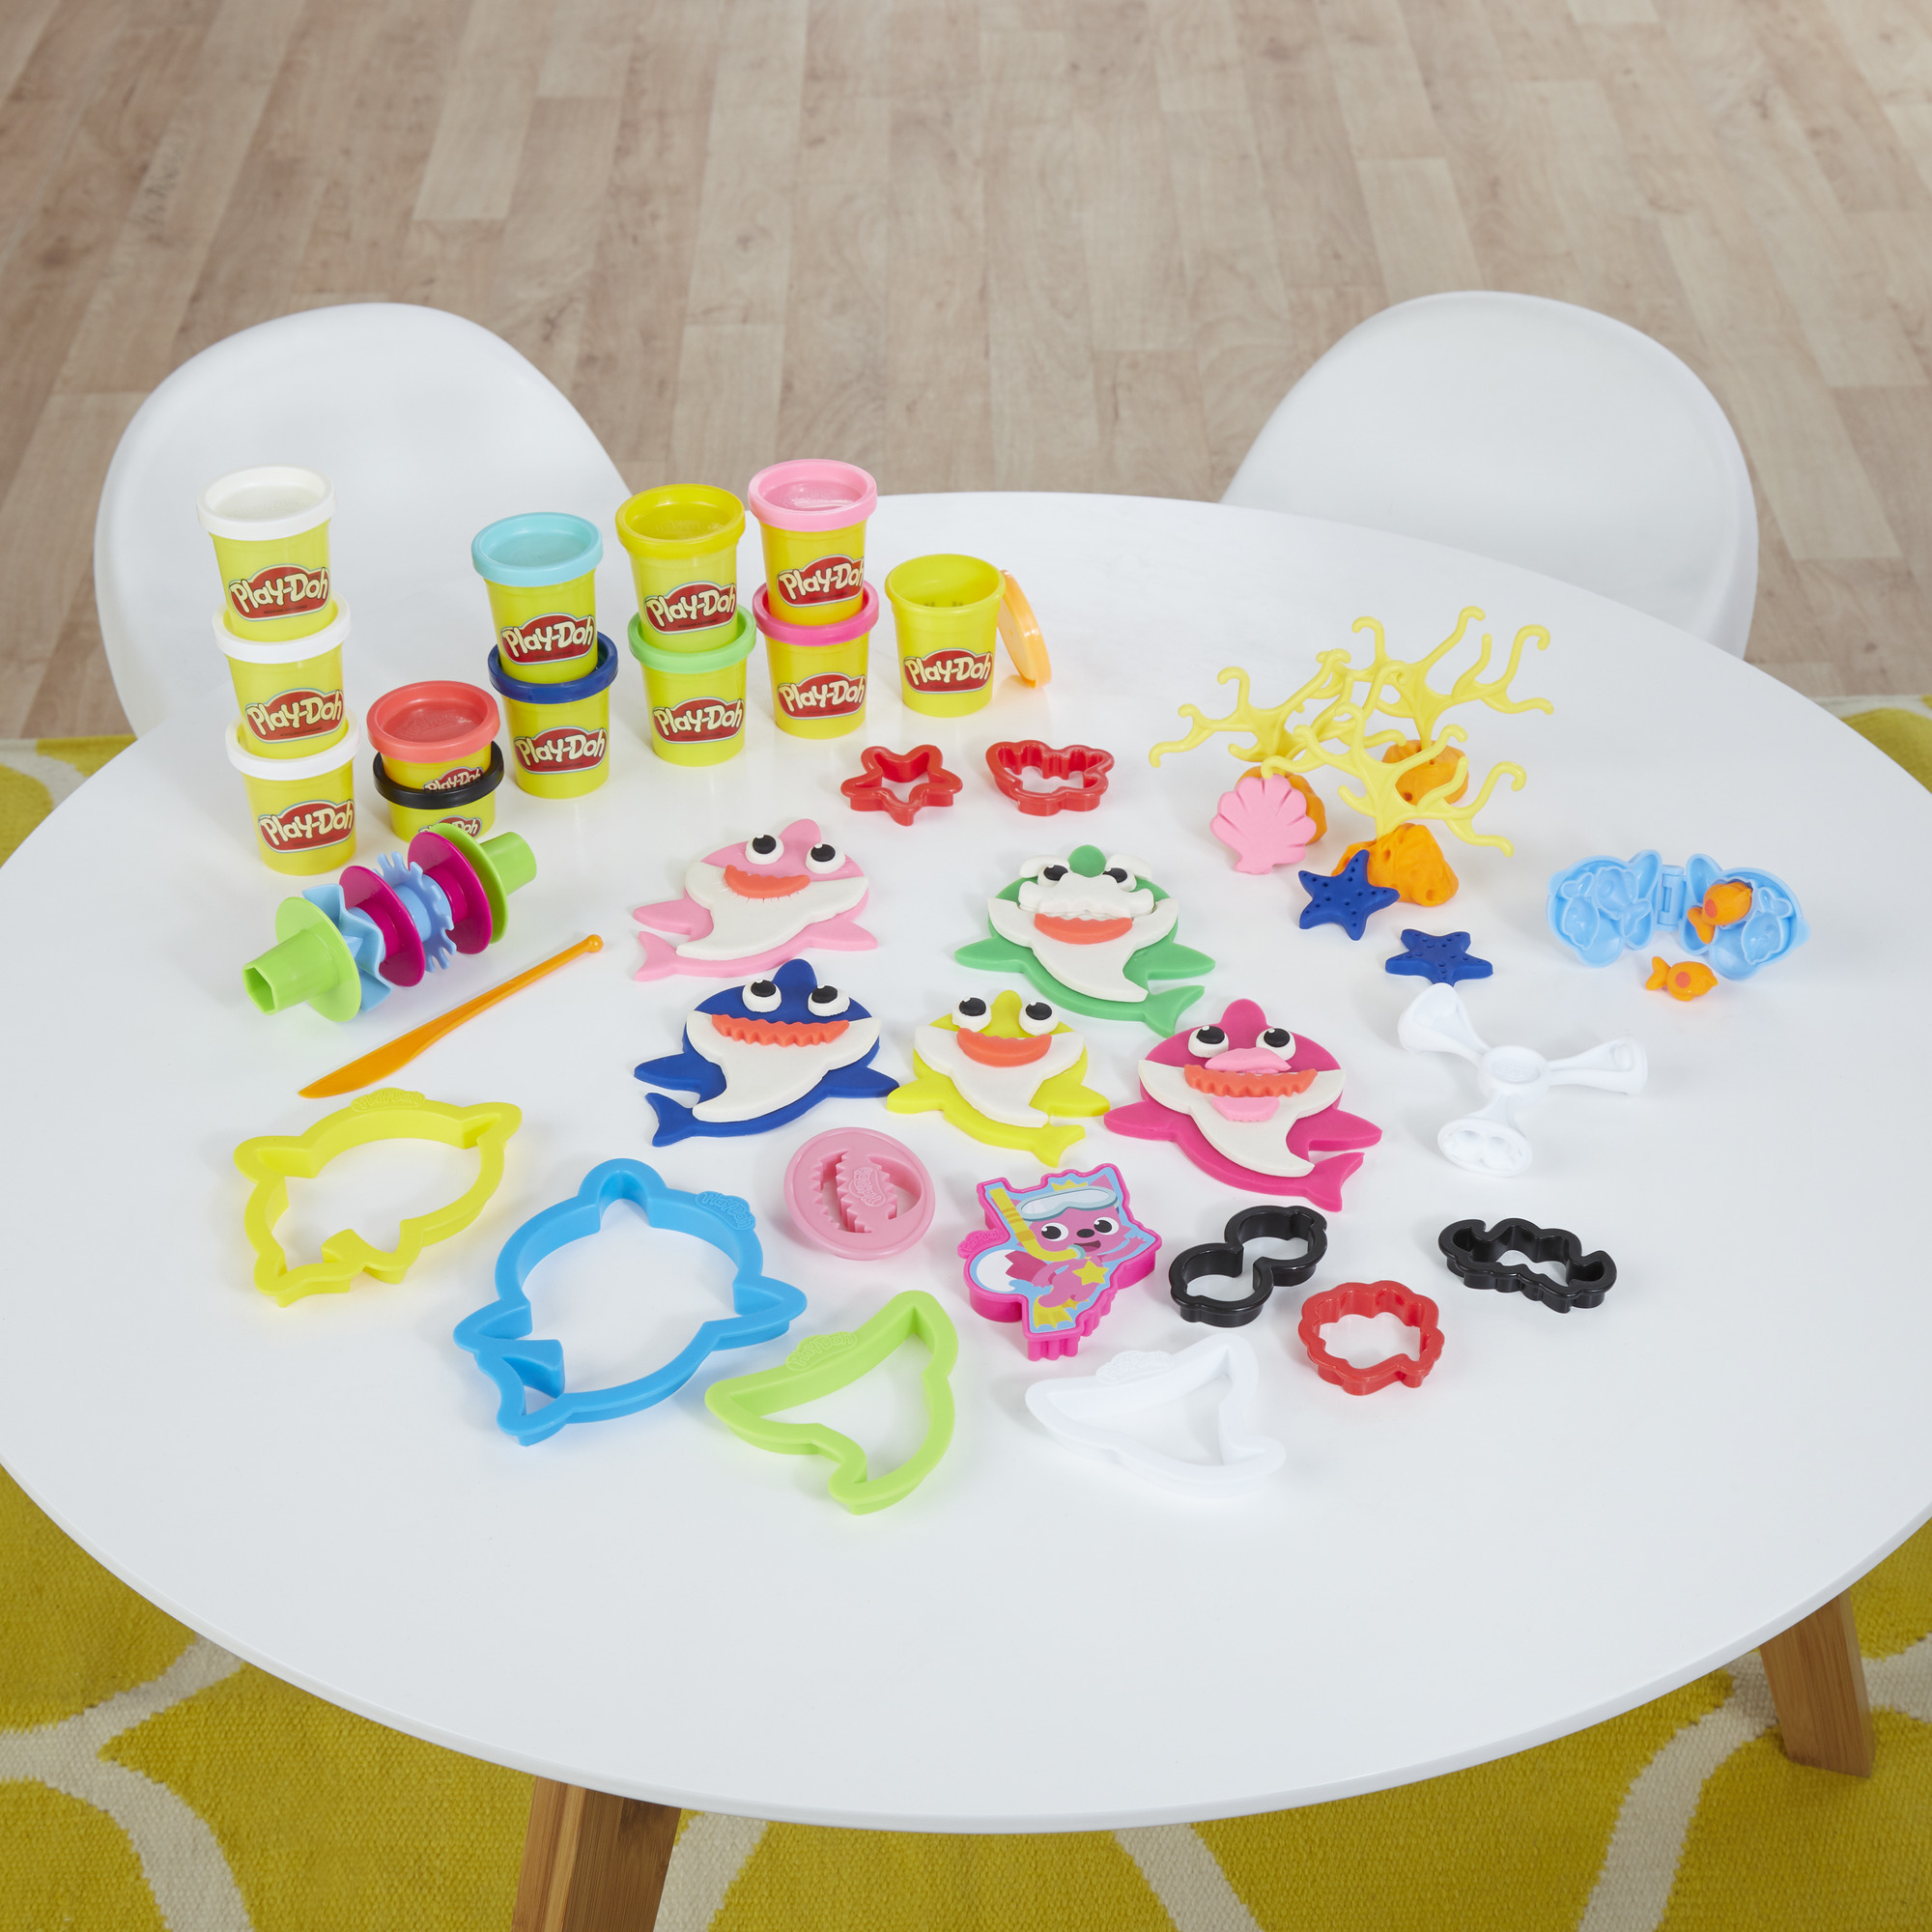 Play-Doh Pinkfong Baby Shark Set with 12 Non-Toxic Cans (22 oz) - image 7 of 8